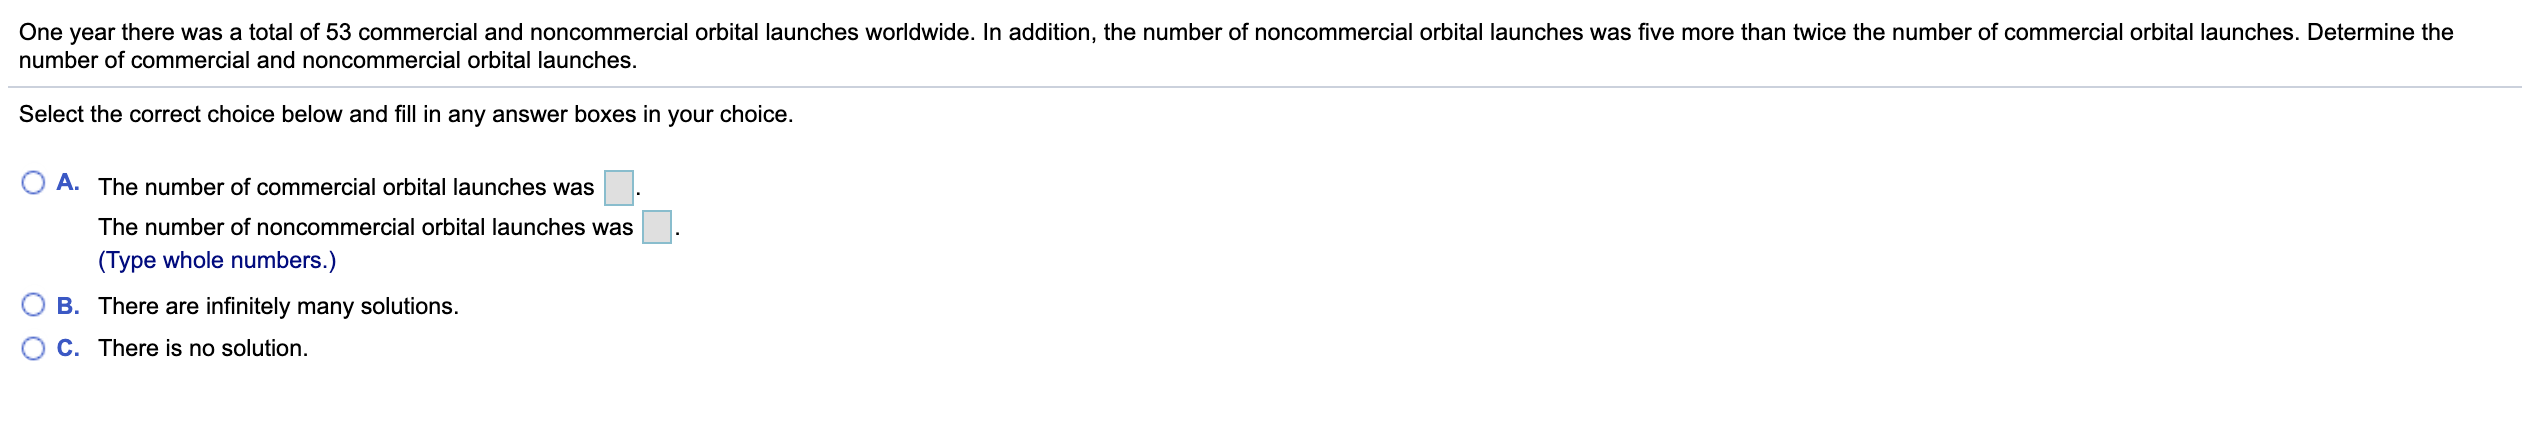 One year there was a total of 53 commercial and noncommercial orbital launches worldwide. In addition, the number of noncommercial orbital launches was five more than twice the number of commercial orbital launches. Determine the
number of commercial and noncommercial orbital launches.
Select the correct choice below and fill in any answer boxes in your choice.
A. The number of commercial orbital launches was
The number of noncommercial orbital launches was
(Type whole numbers.)
B. There are infinitely many solutions.
C. There is no solution.
